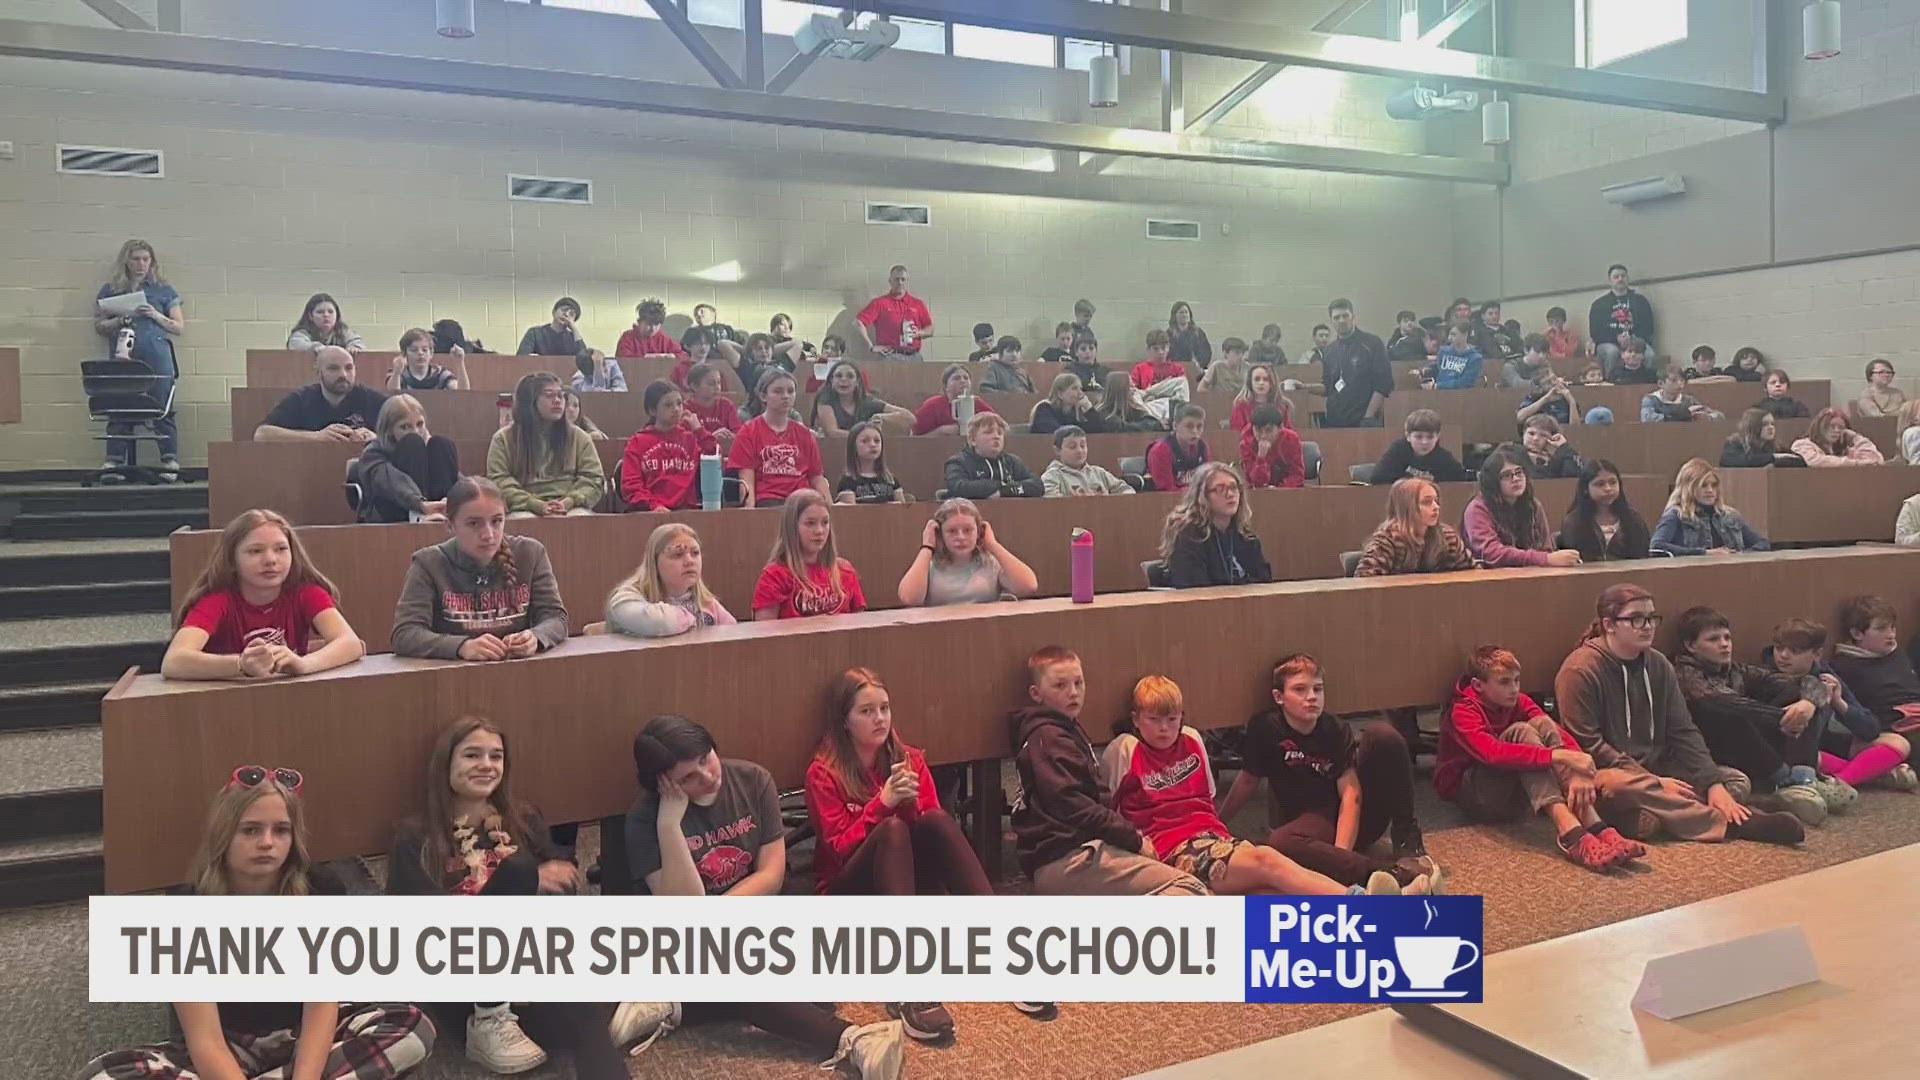 Students in Cedar Springs sent thank you letters to 13 ON YOUR SIDE after a recent school visit.